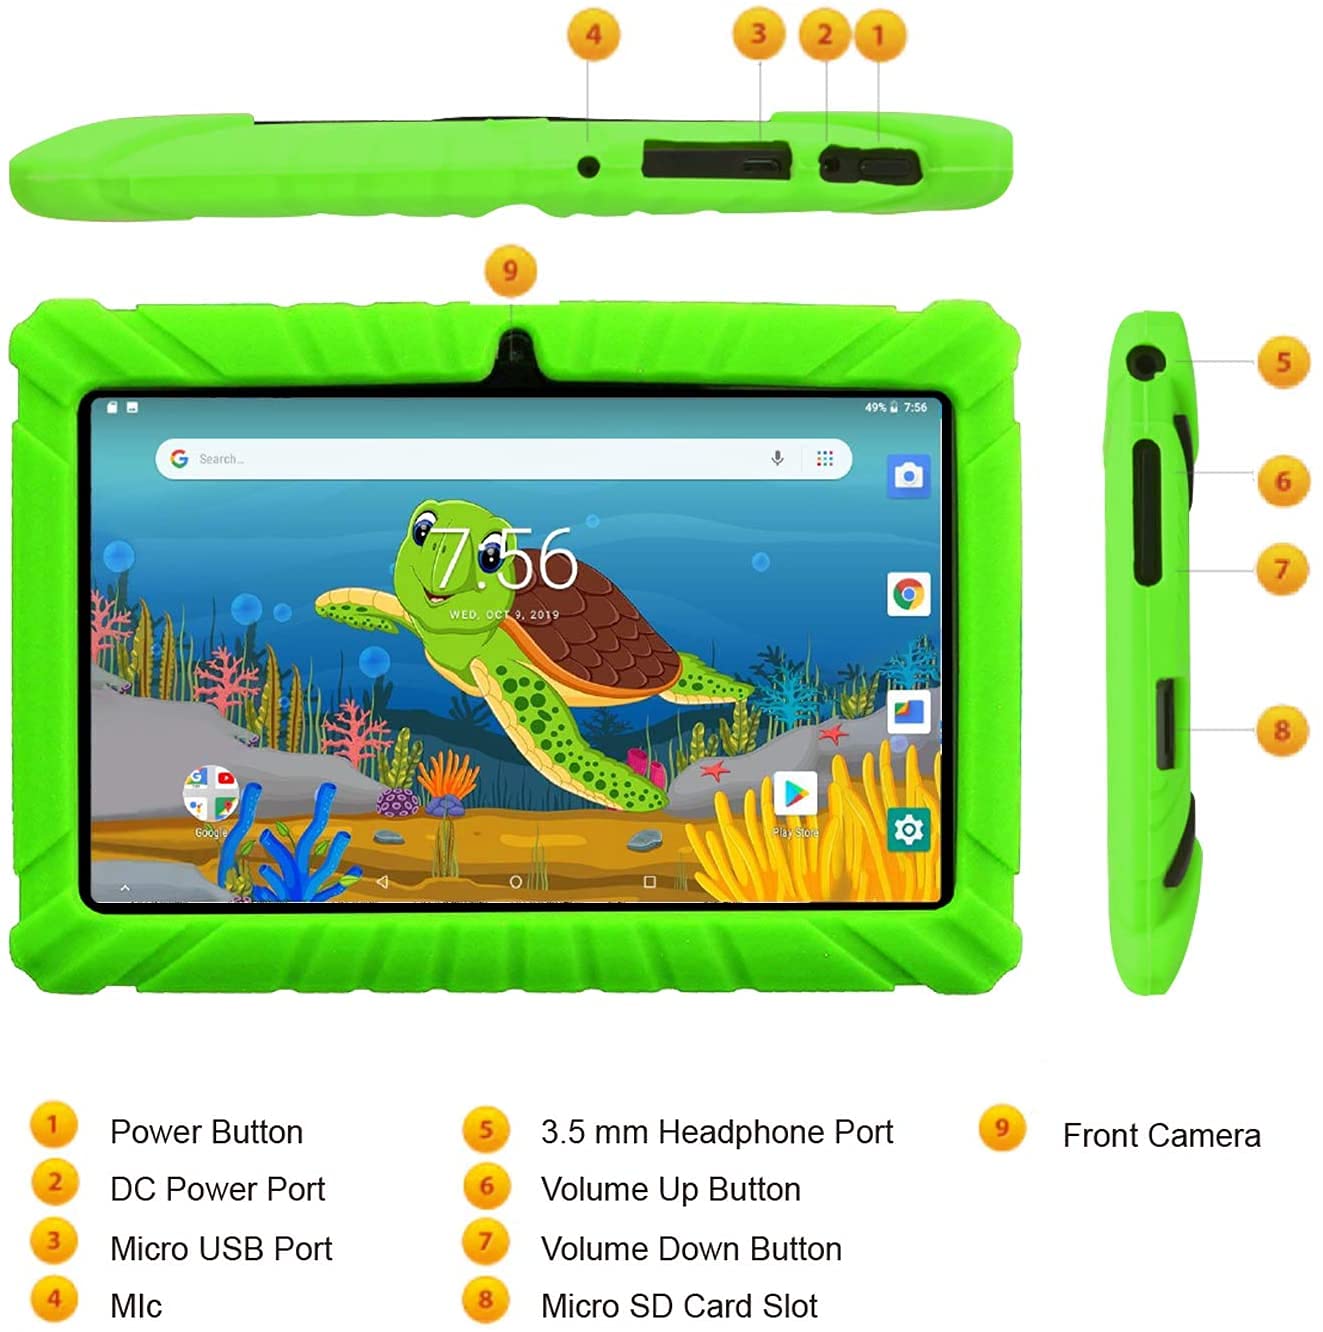 Contixo Kids Tablet Bundle V8, 7-inch HD, ages 3-7, Toddler Learning Tablet with Camera, WiFi, Parental Control & Kid Safe 85dB Bluetooth On The Ear Headphones Bundle Green, Perfect for Back to School